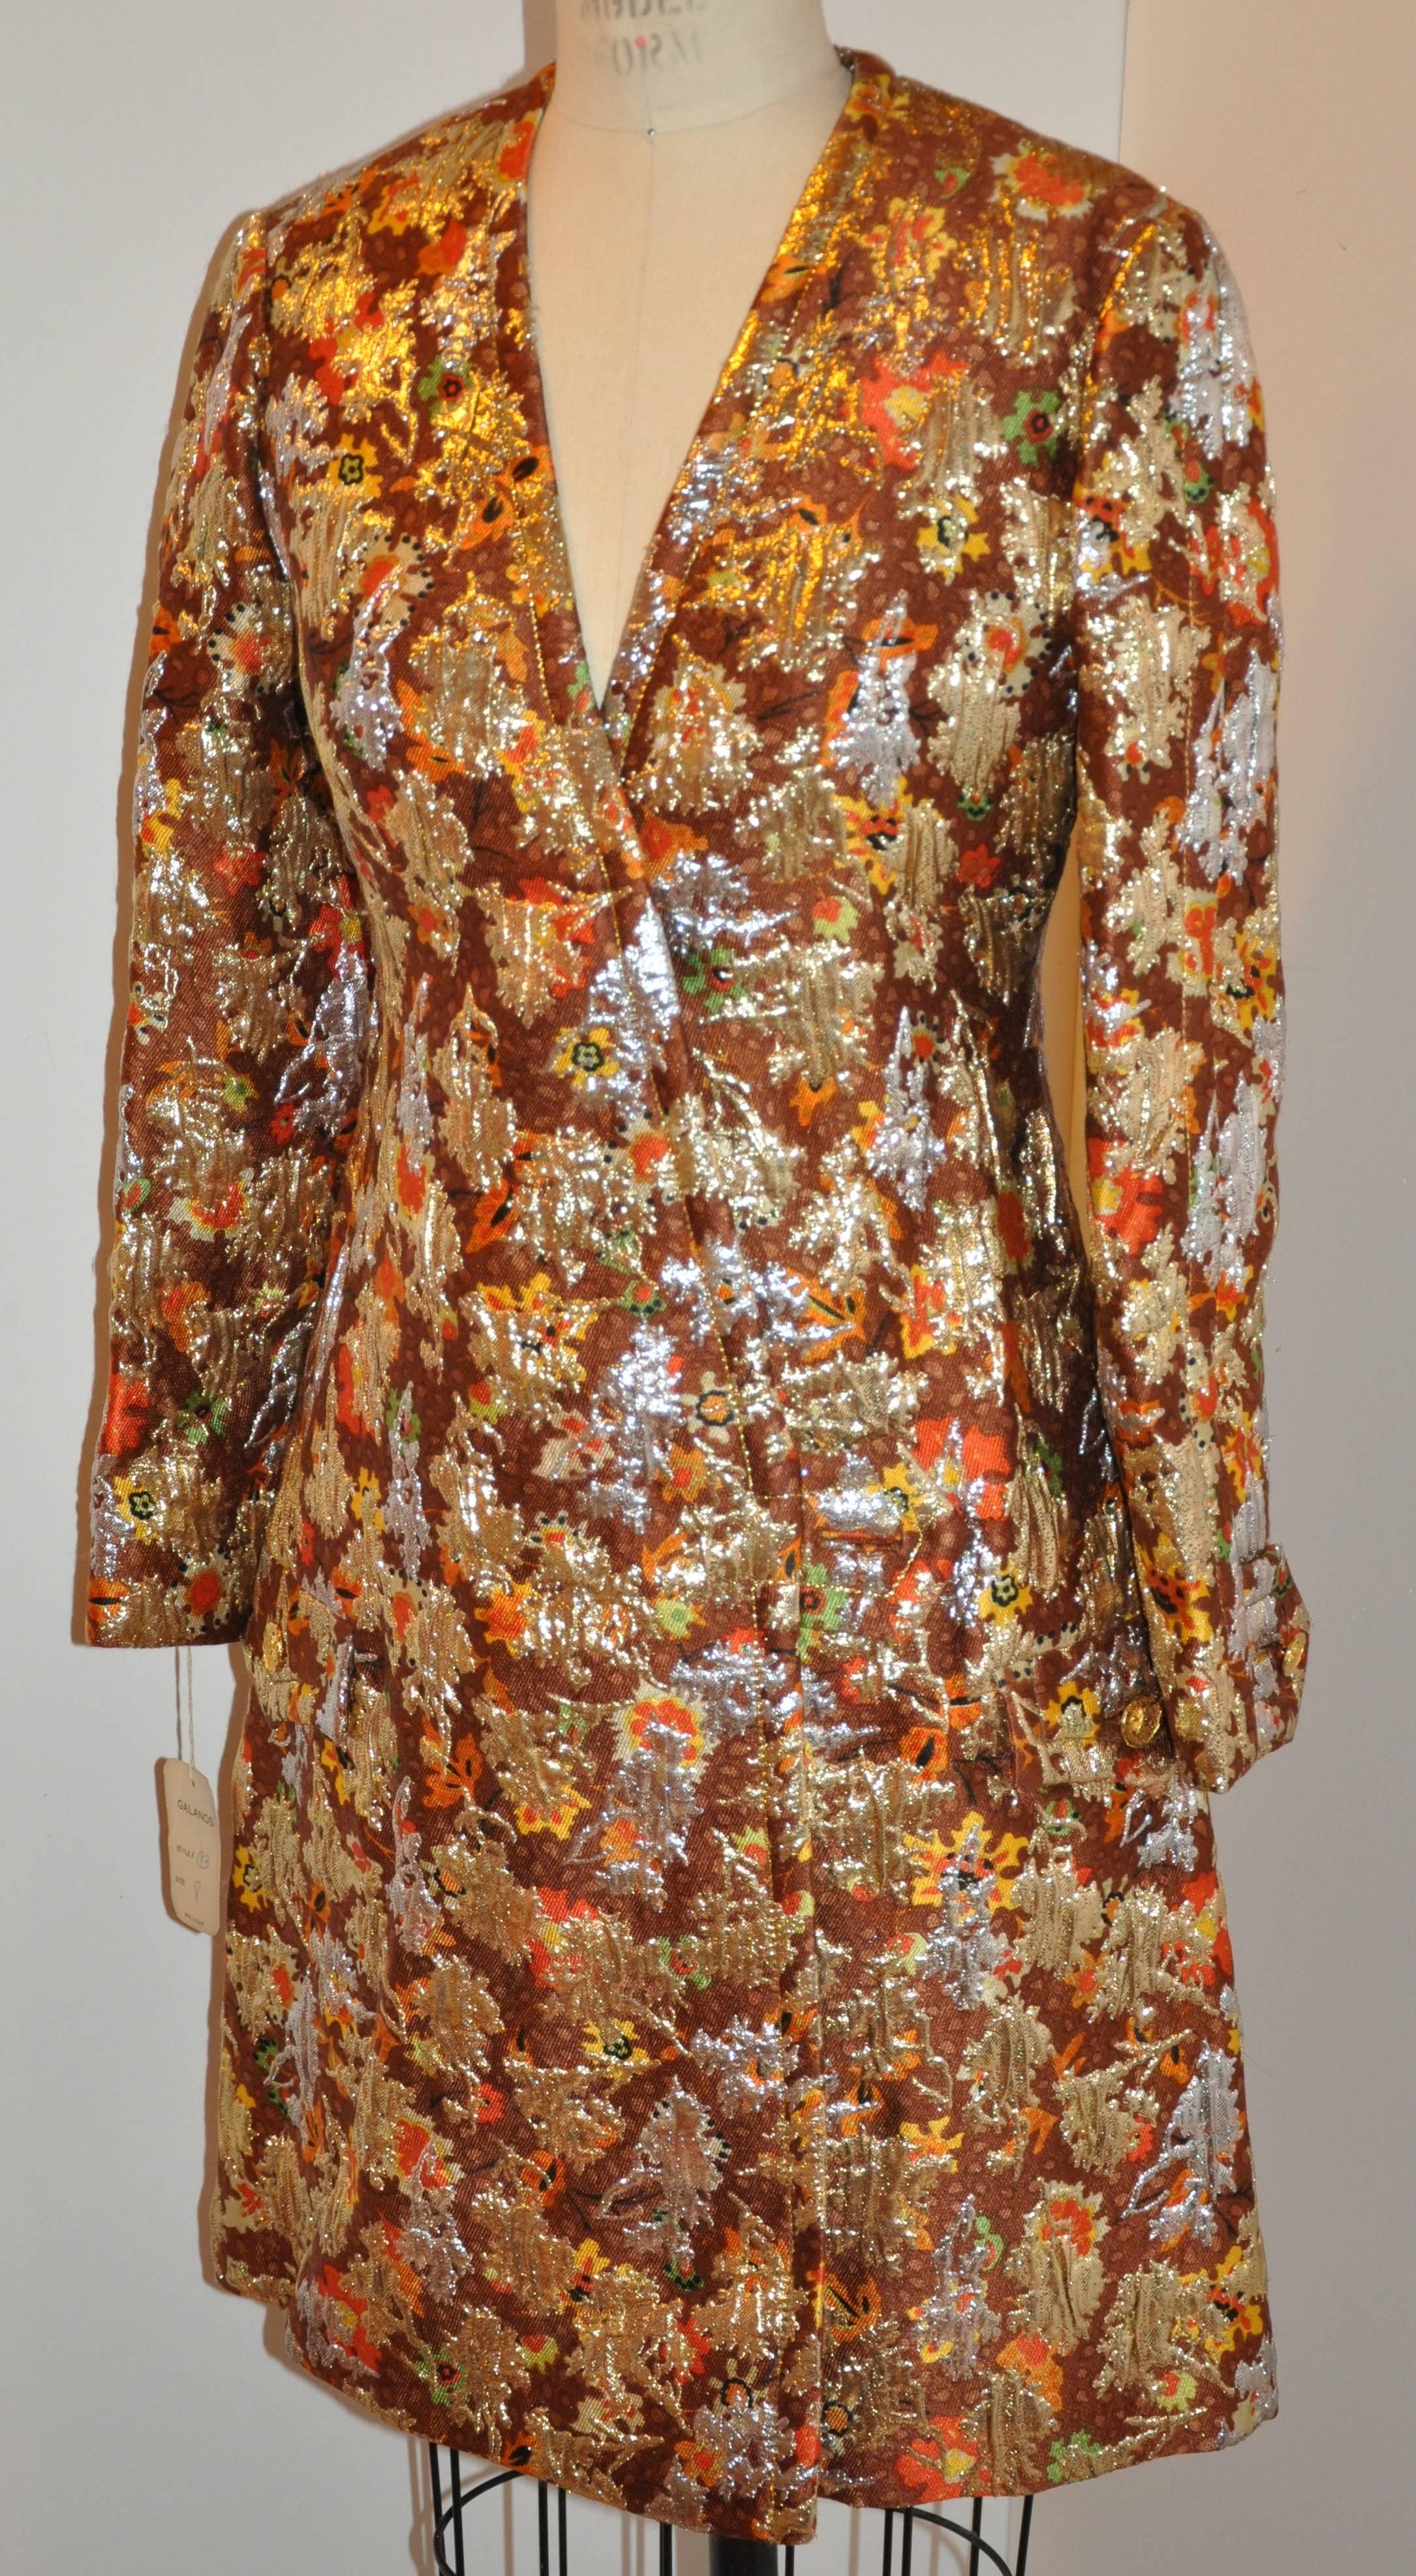        Galanos wonderfully elegant bold multi-color florals with metallic gold lame accent brocade evening coat is finished with a coco brown silk lining interior. A Runway sample, made of 52% wool, 28% rayon, 12% metallic threads, and 8% silk on